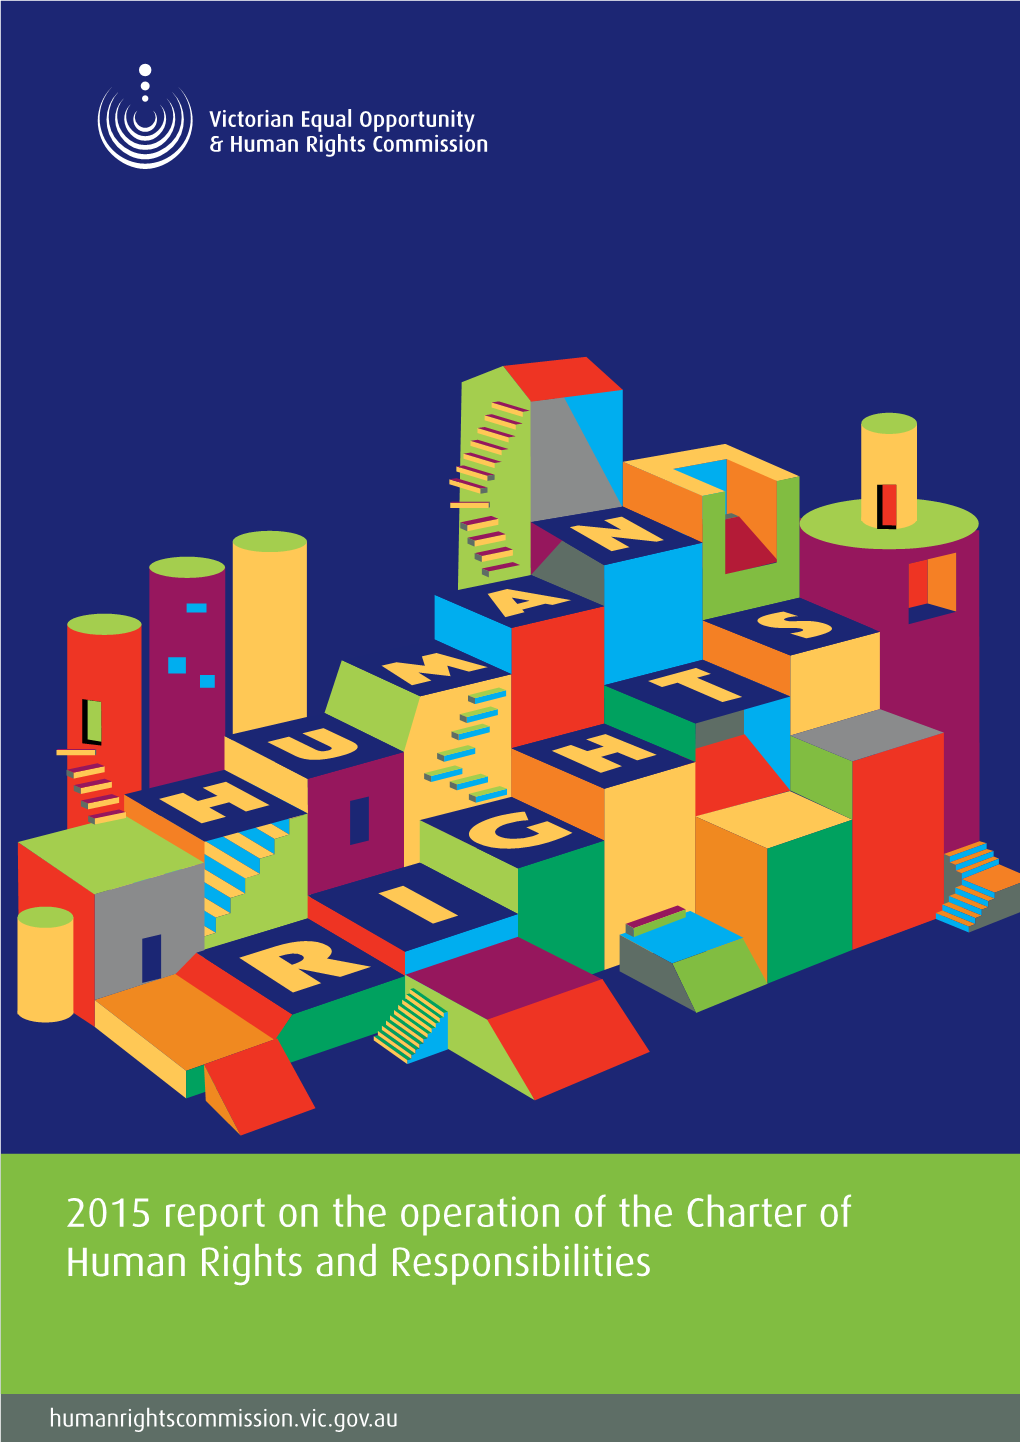 2015 Report on the Operation of the Charter of Human Rights and Responsibilities